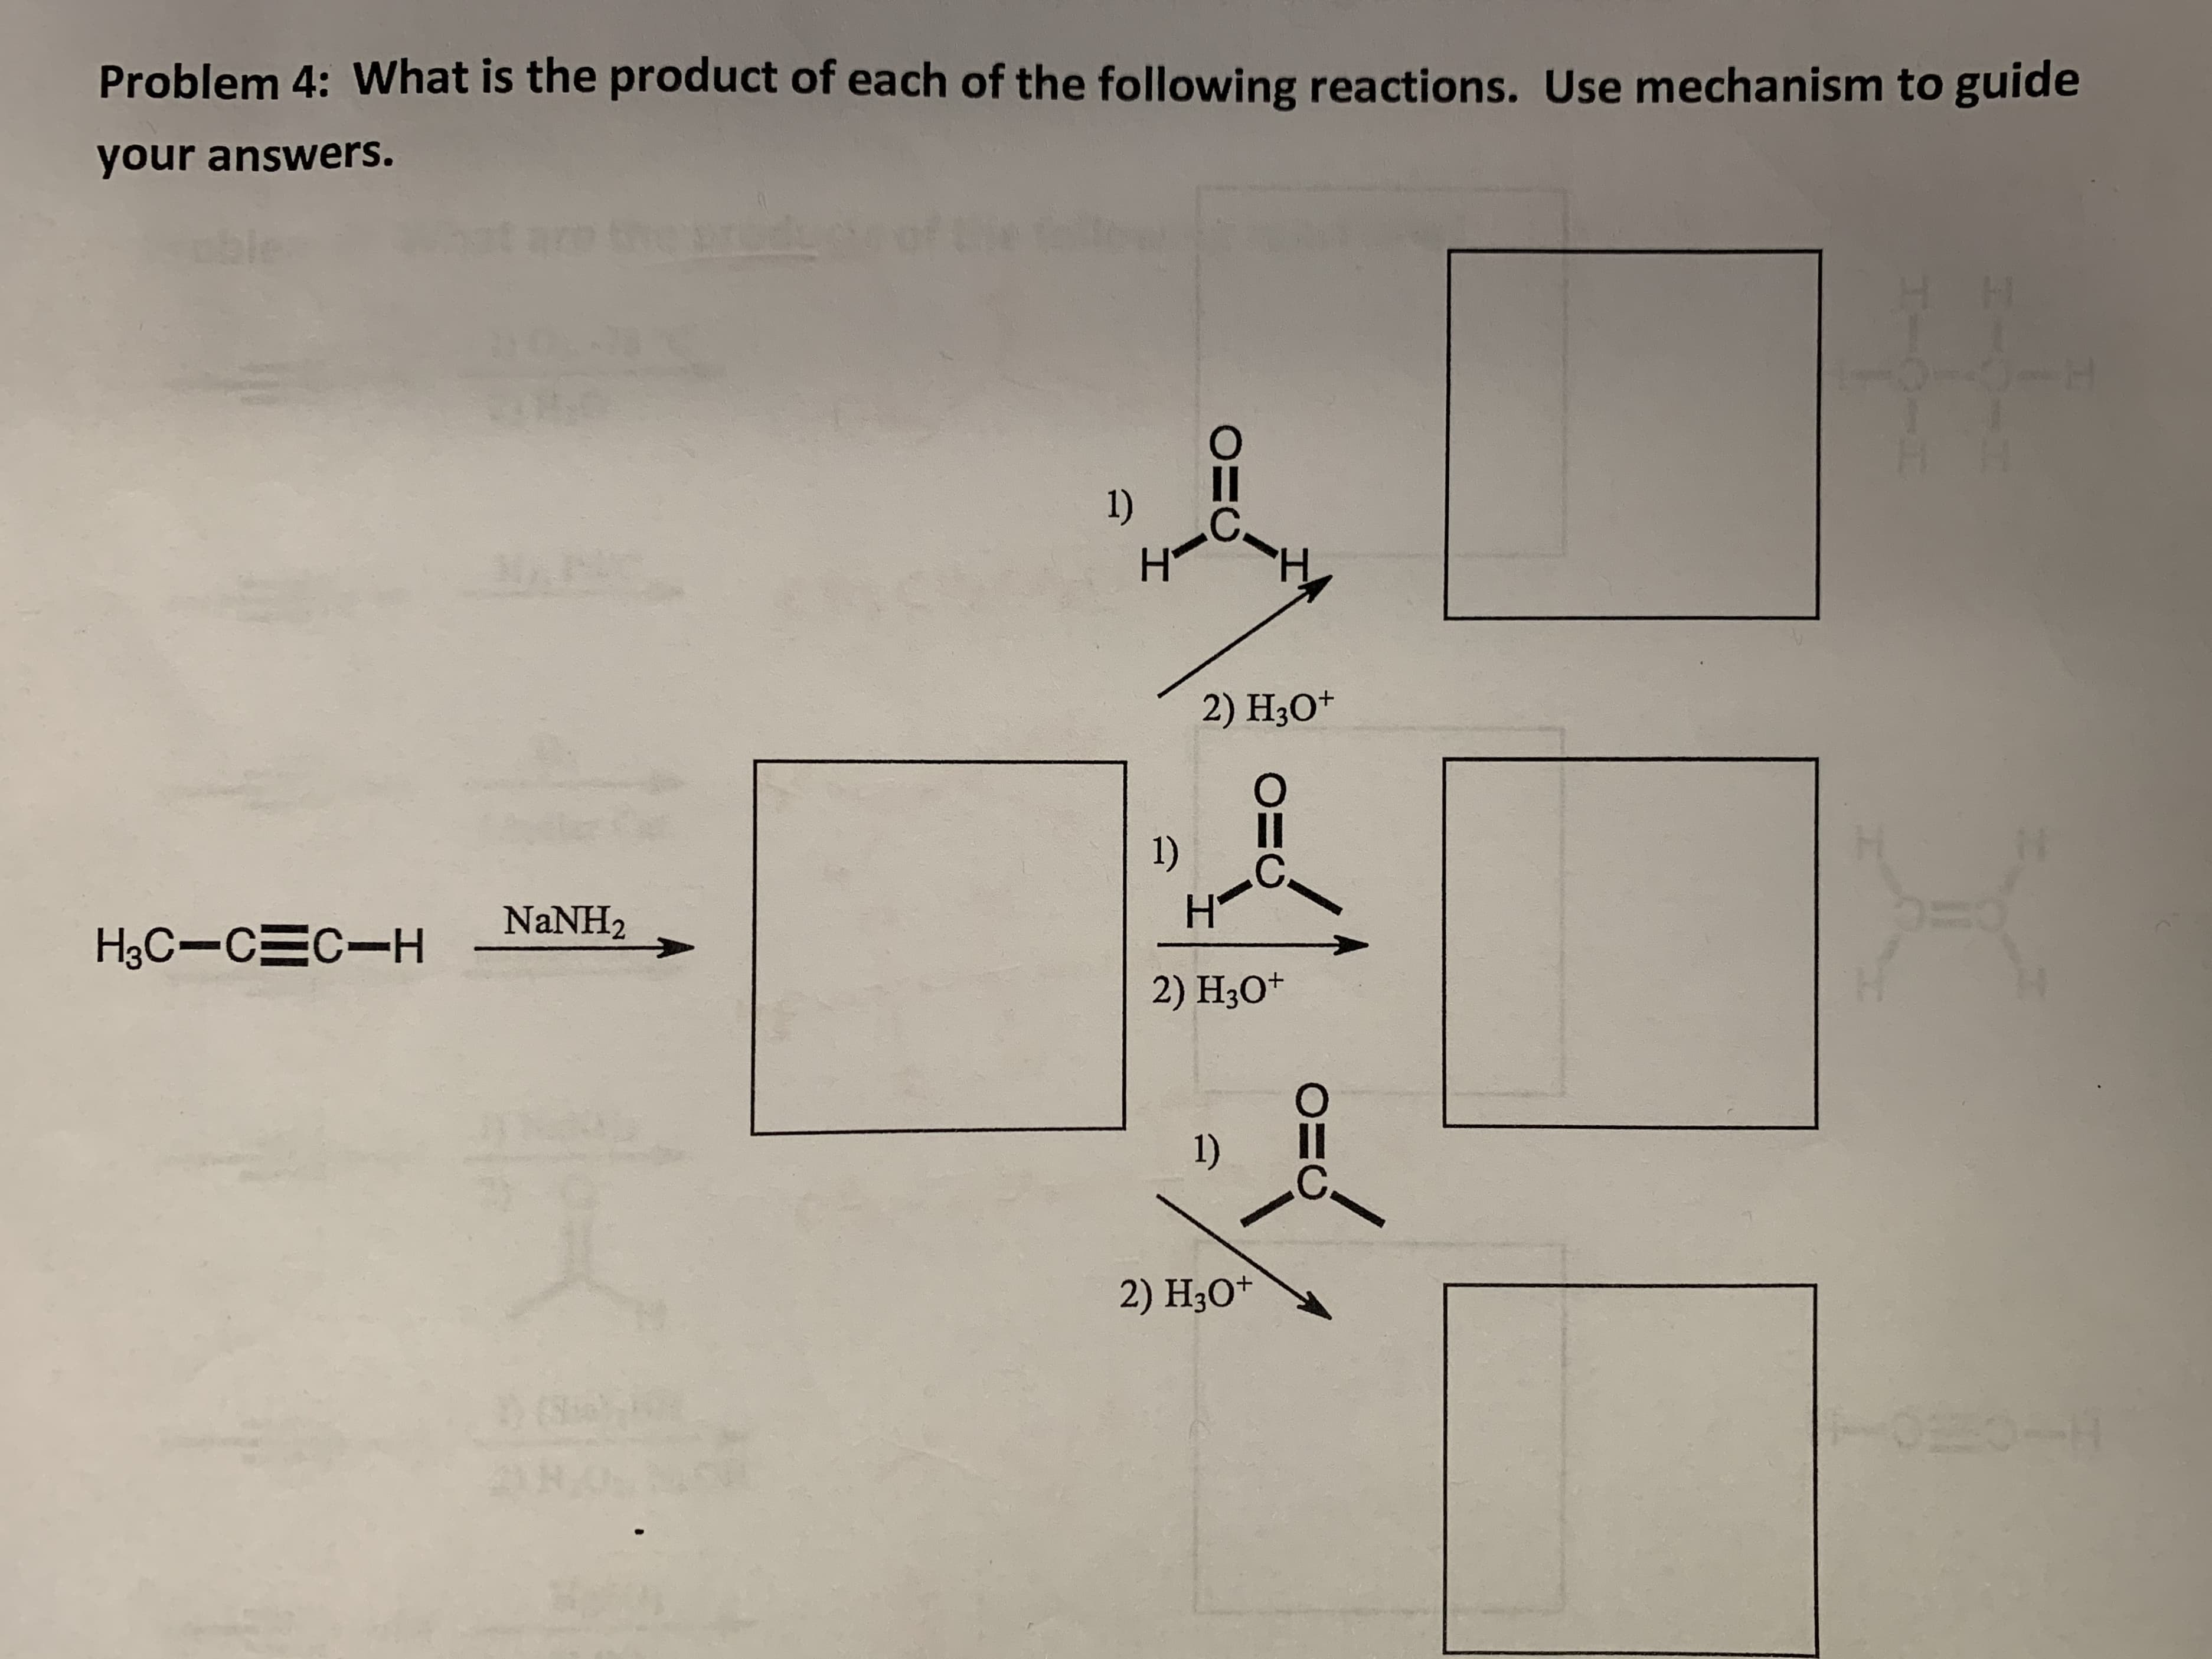 Problem 4: What is the product of each of the following reactions. Use mechanism to guide
your answers.
an
1)
2) H3O+
I3D
1)
NaNH2
HзС—сЕс-Н
2) H3O+
1)
.C.
2) H3O+
(S
